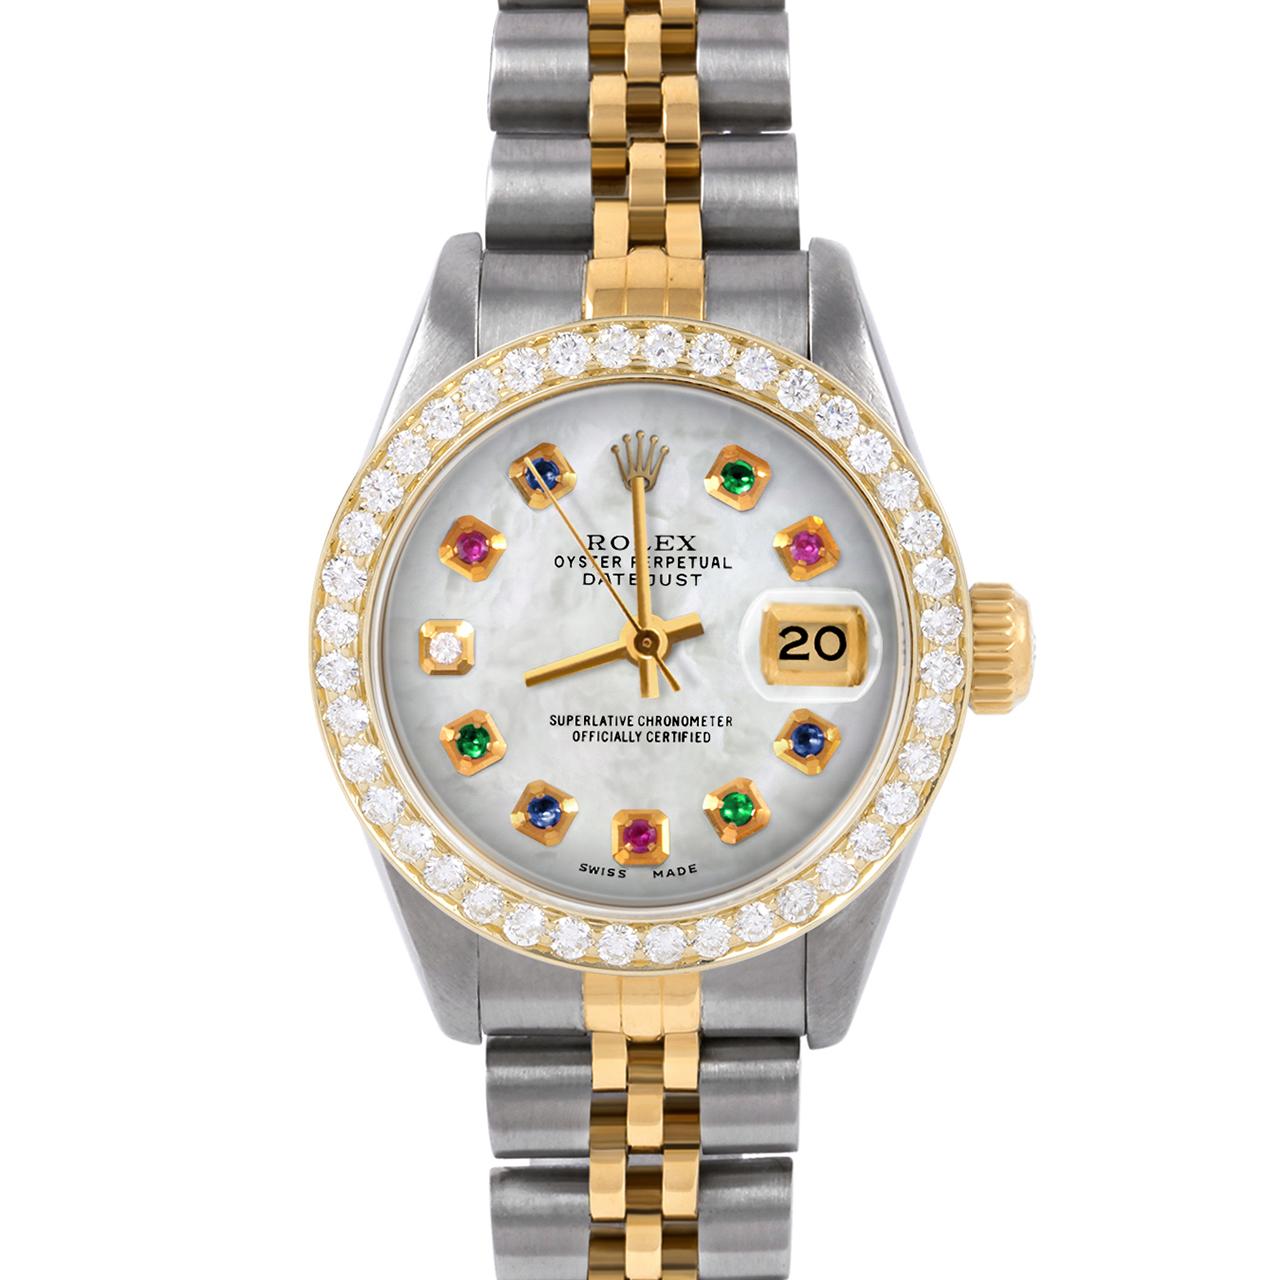 Swiss Wrist - SKU 6917-TT-WMOP-DIA-AM-BDS-JBL

Brand : Rolex
Model : Datejust (Non-Quickset Model)
Gender : Ladies
Metals : 14K/Stainless Steel
Case Size : 26 mm

Dial : Custom Mother Of Pearl Rainbow Emerald Ruby Sapphire Diamond Dial (This dial is